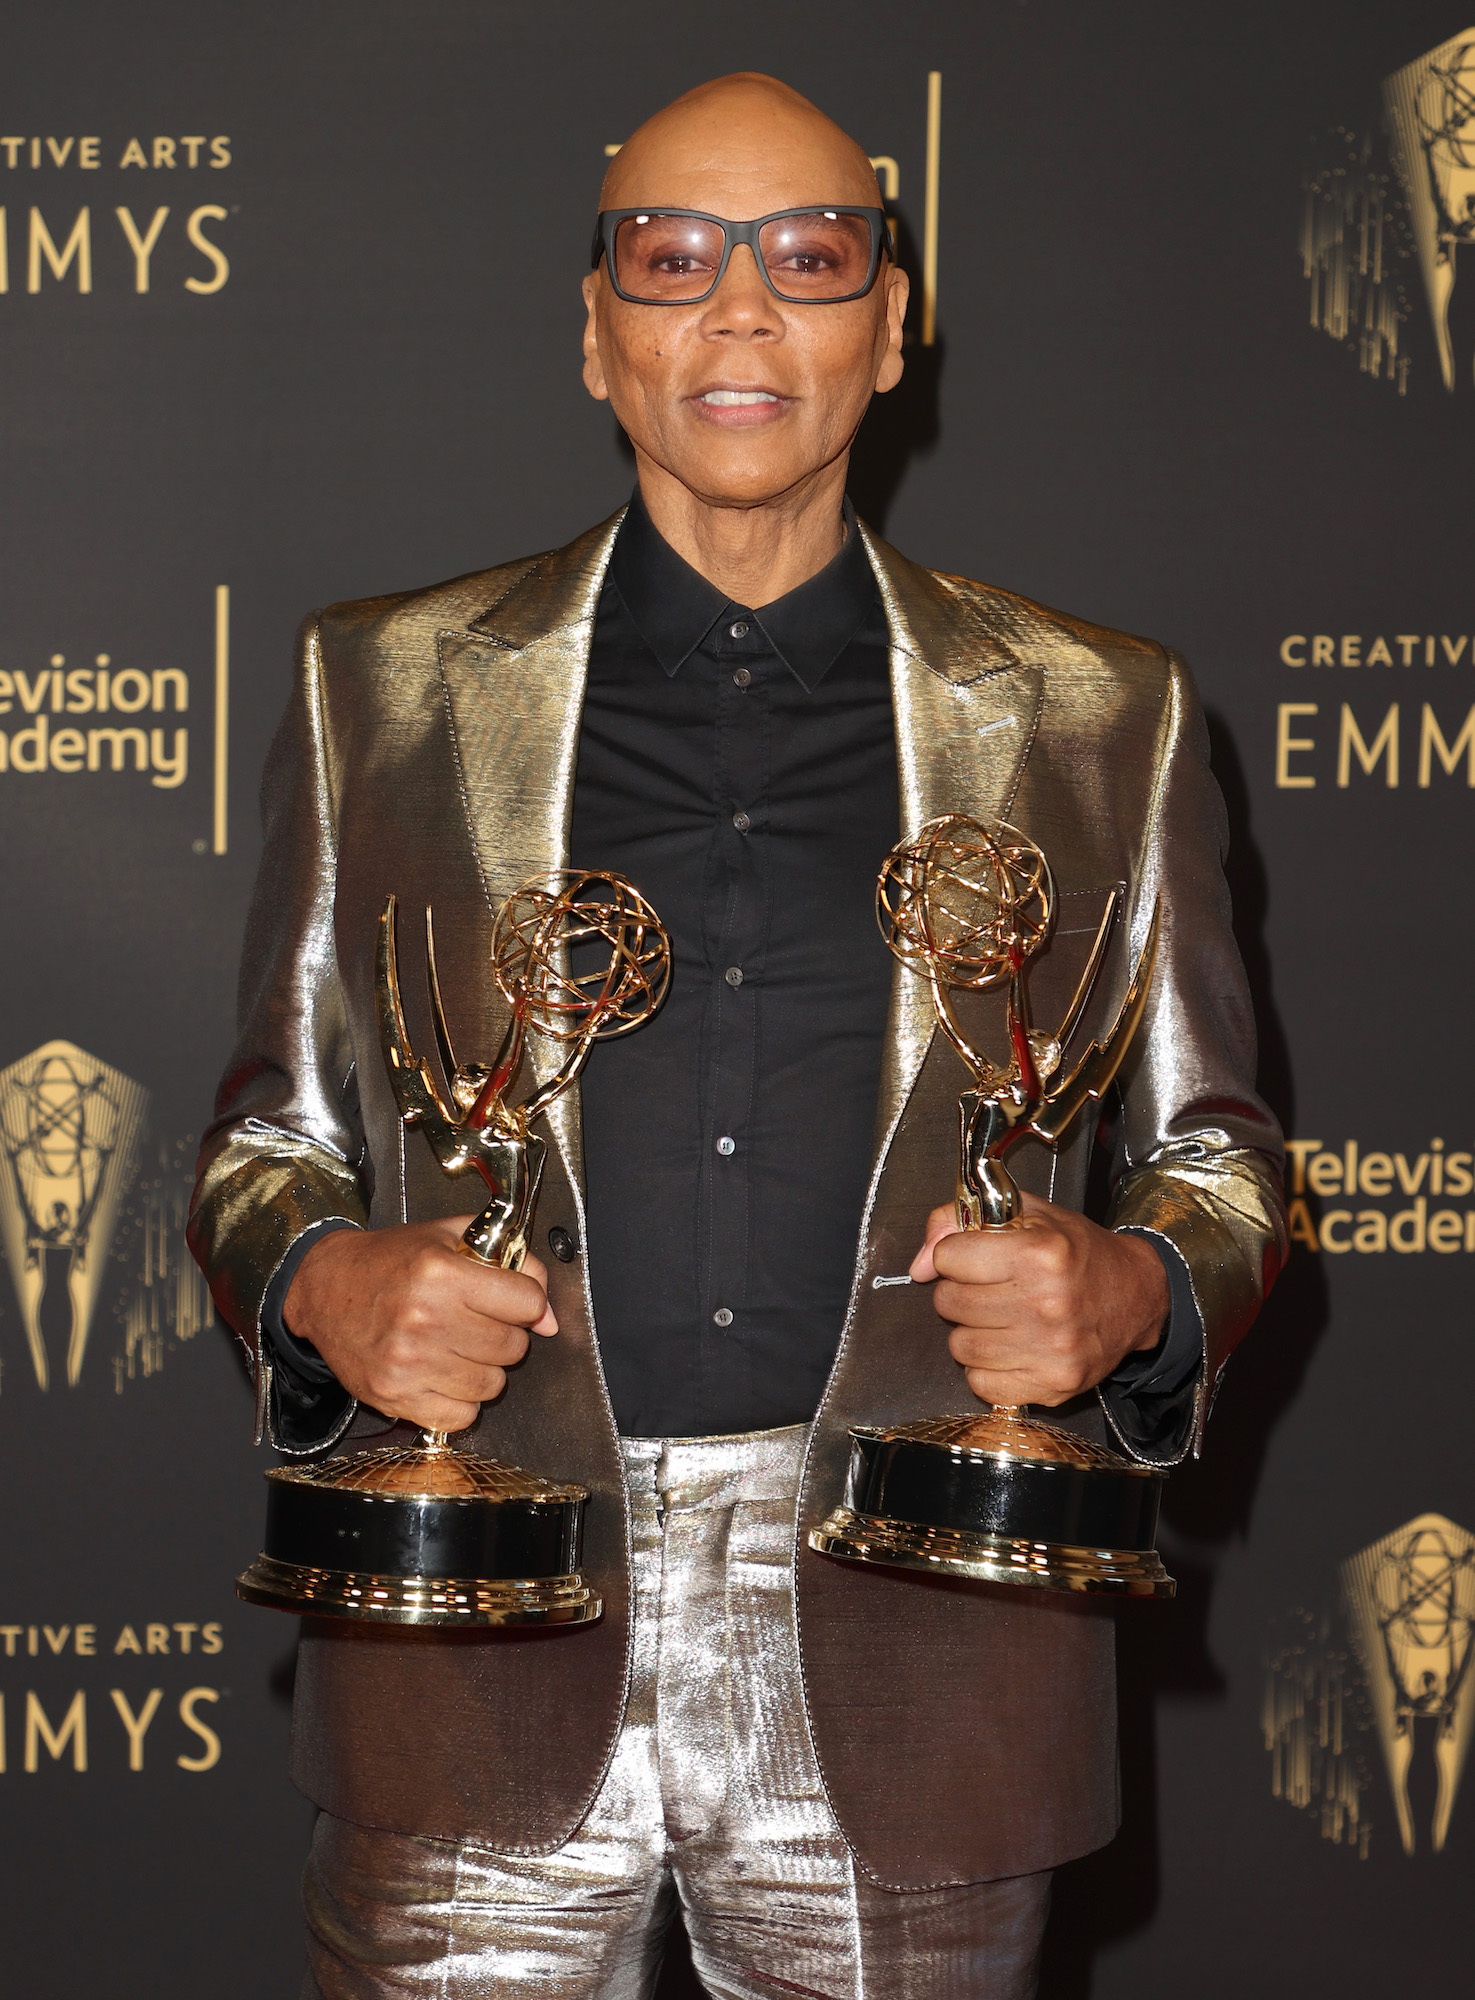 RuPaul holding two Emmy awards at the 2021 Creative Arts Emmys